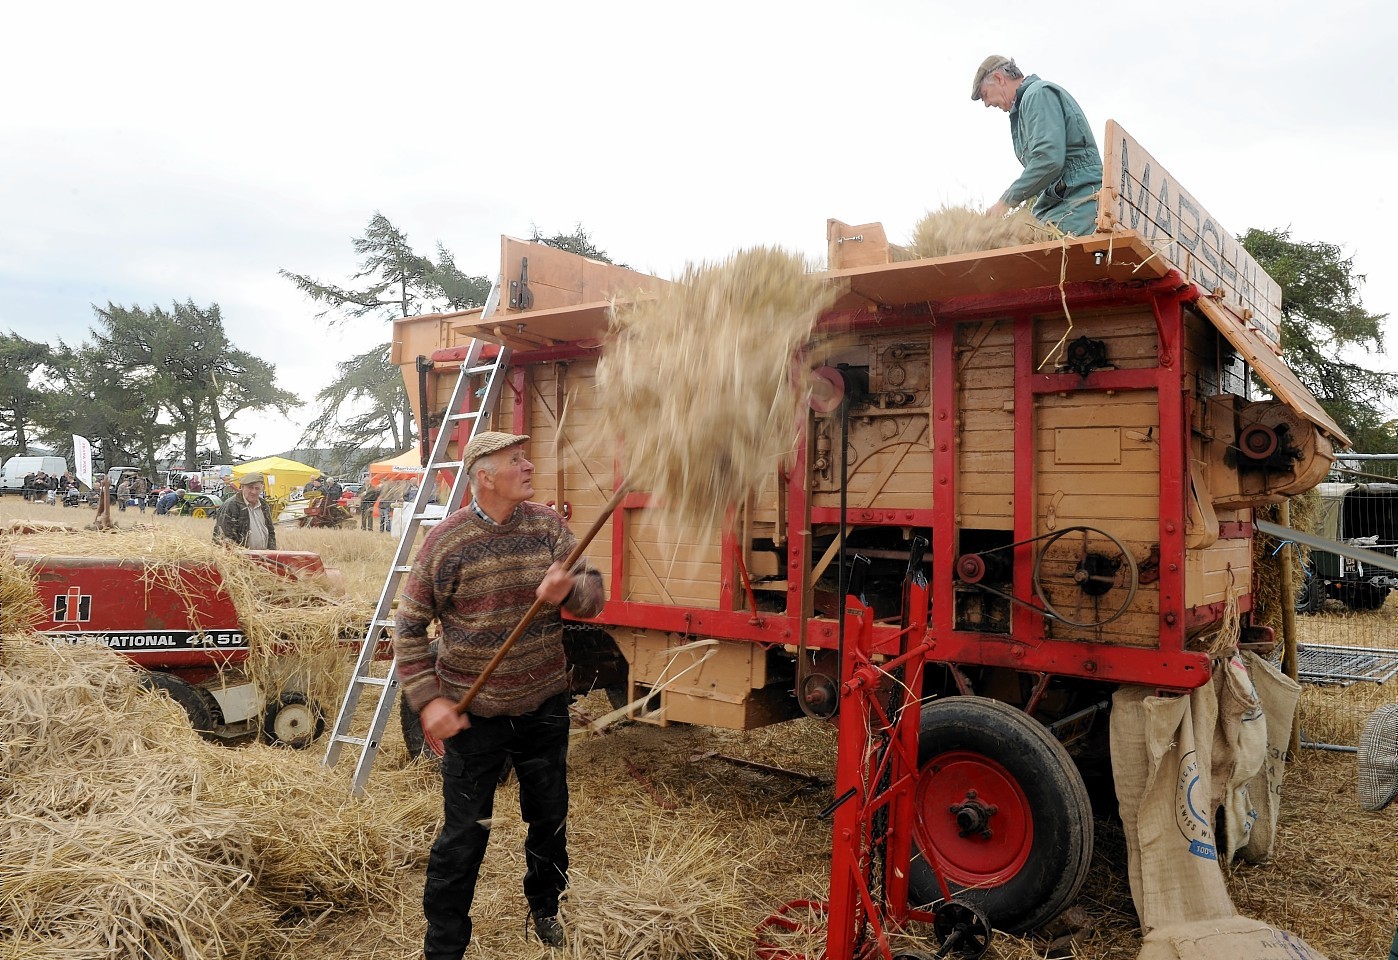 Agricultural machinery on display at the Strathnairn vintage rally